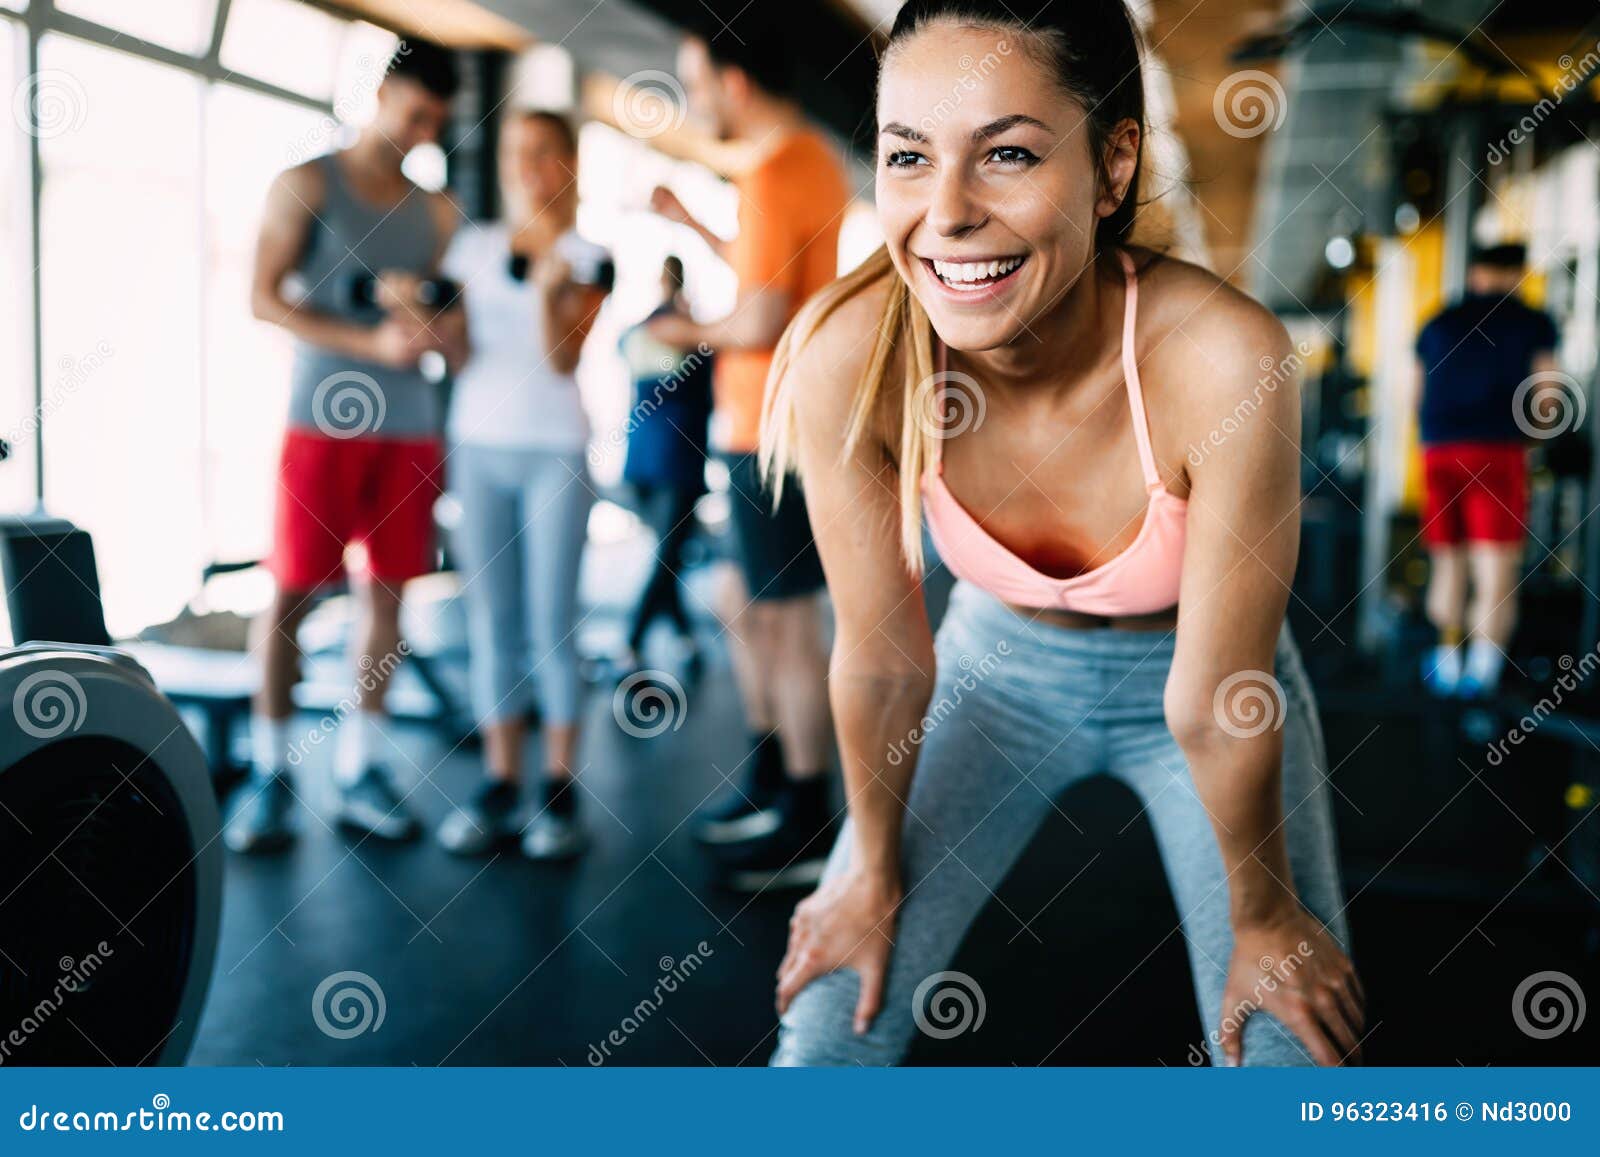 Close Up Image of Attractive Fit Woman in Gym Stock Photo - Image of ...